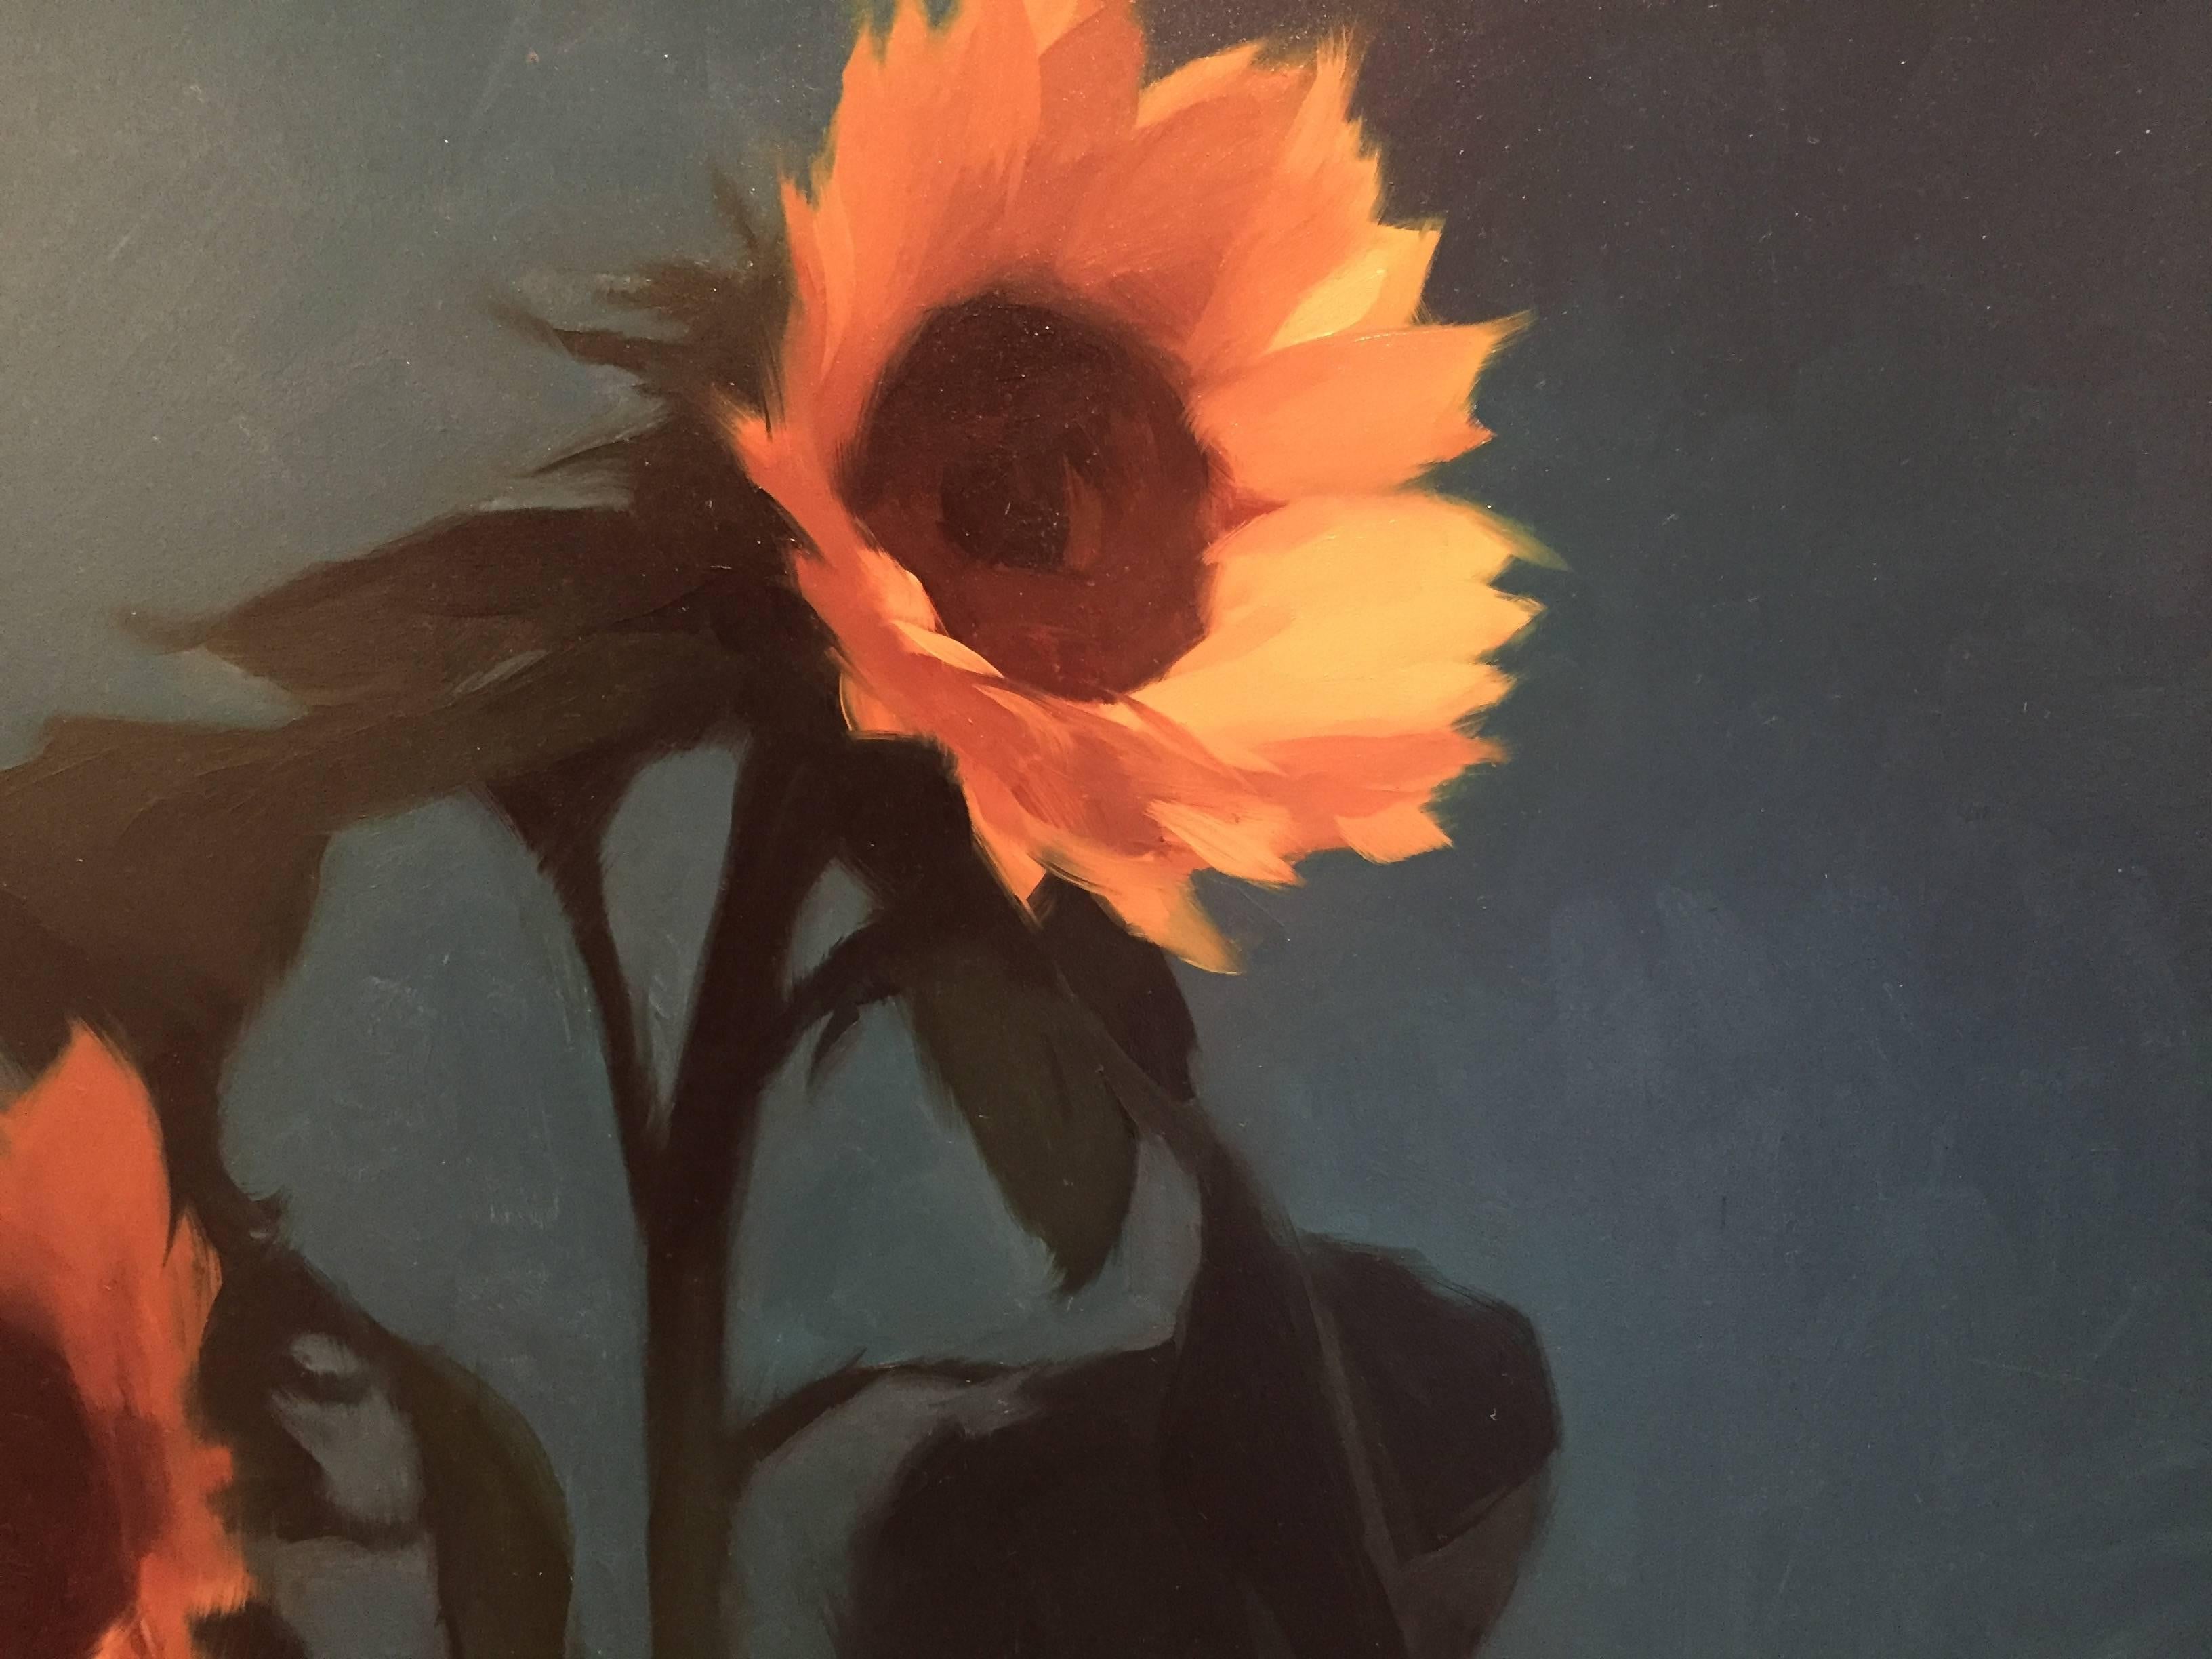 A still life painting of sunflowers, composed against a blue background, petals catch light from a source above.

Framed dimensions: 14 x 14 inches

Born in Memphis, Tennessee in 1980 Bauman's family soon after that relocated to Miami, Florida where